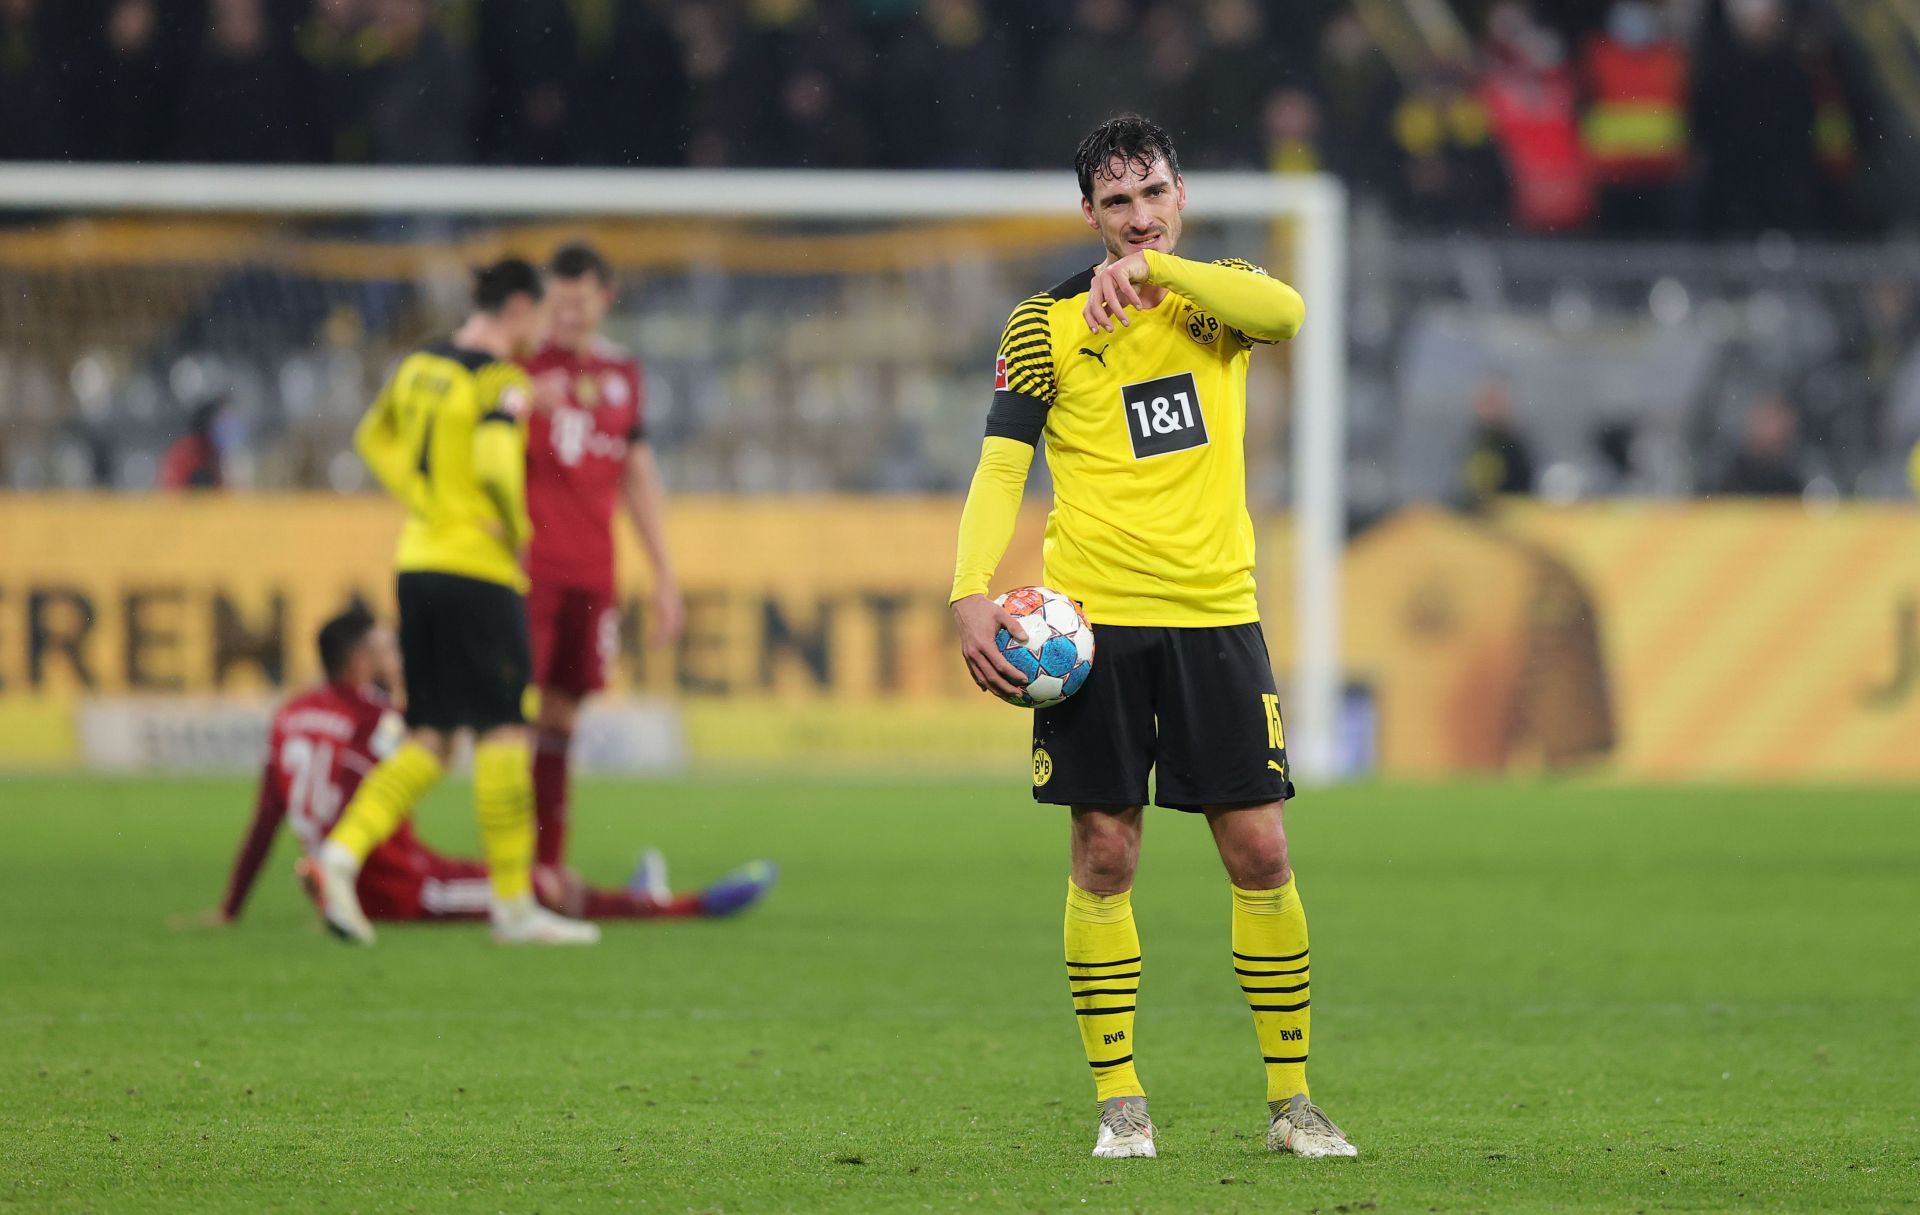 Mats Hummels had a poor outing defensively against Bayern Munich